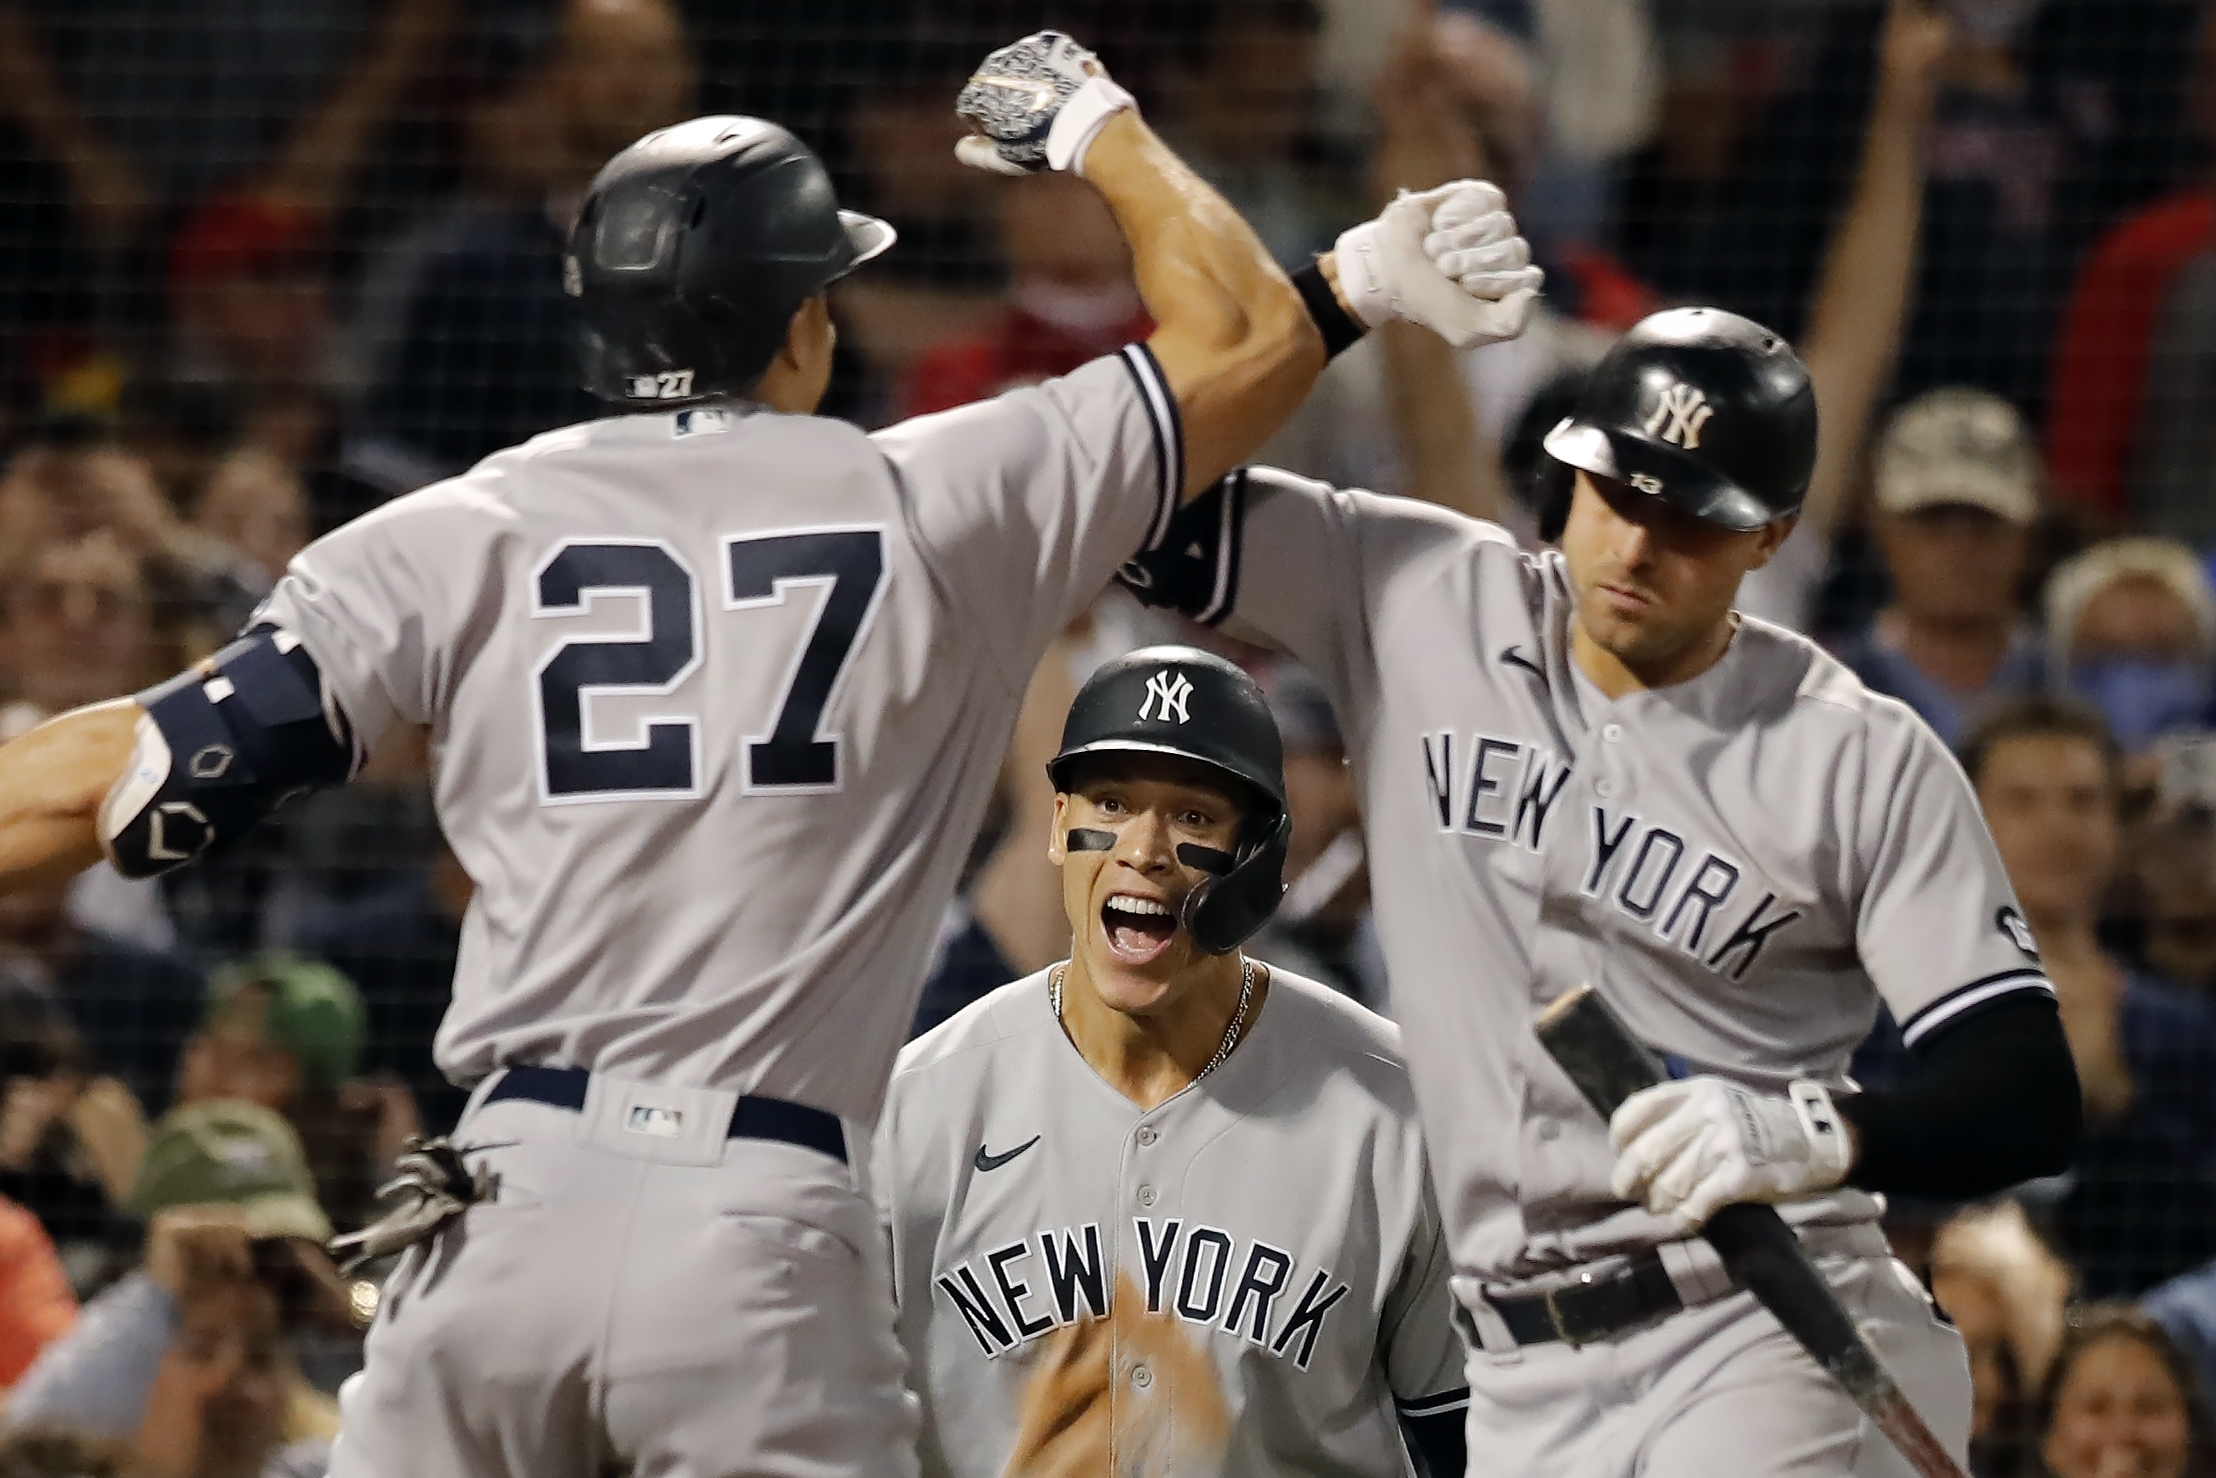 Yankees vs. Rays: the Savages vs. the Stable